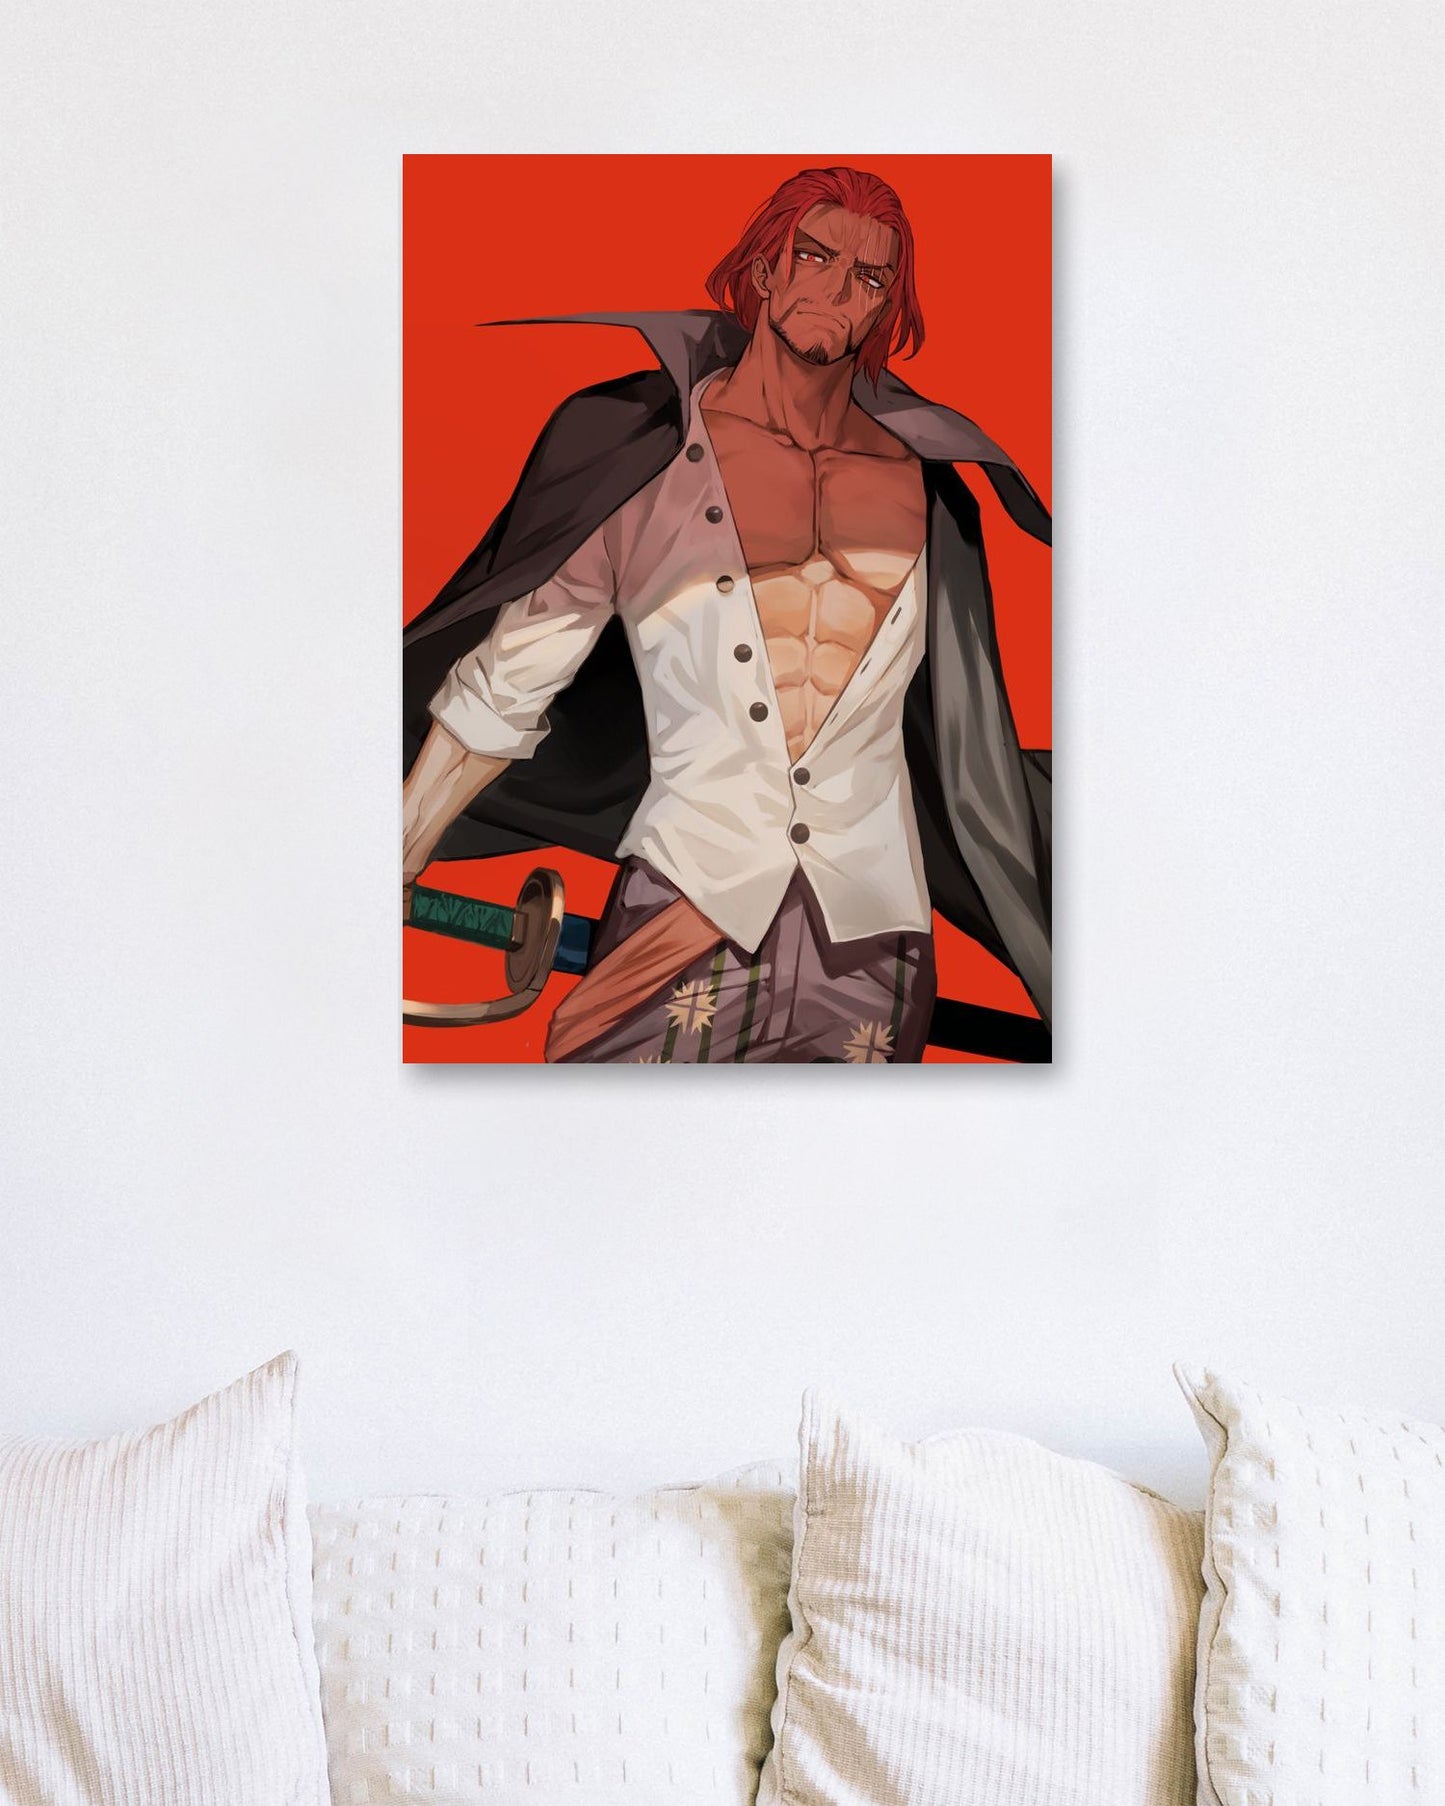 Shanks 9 - @UPGallery